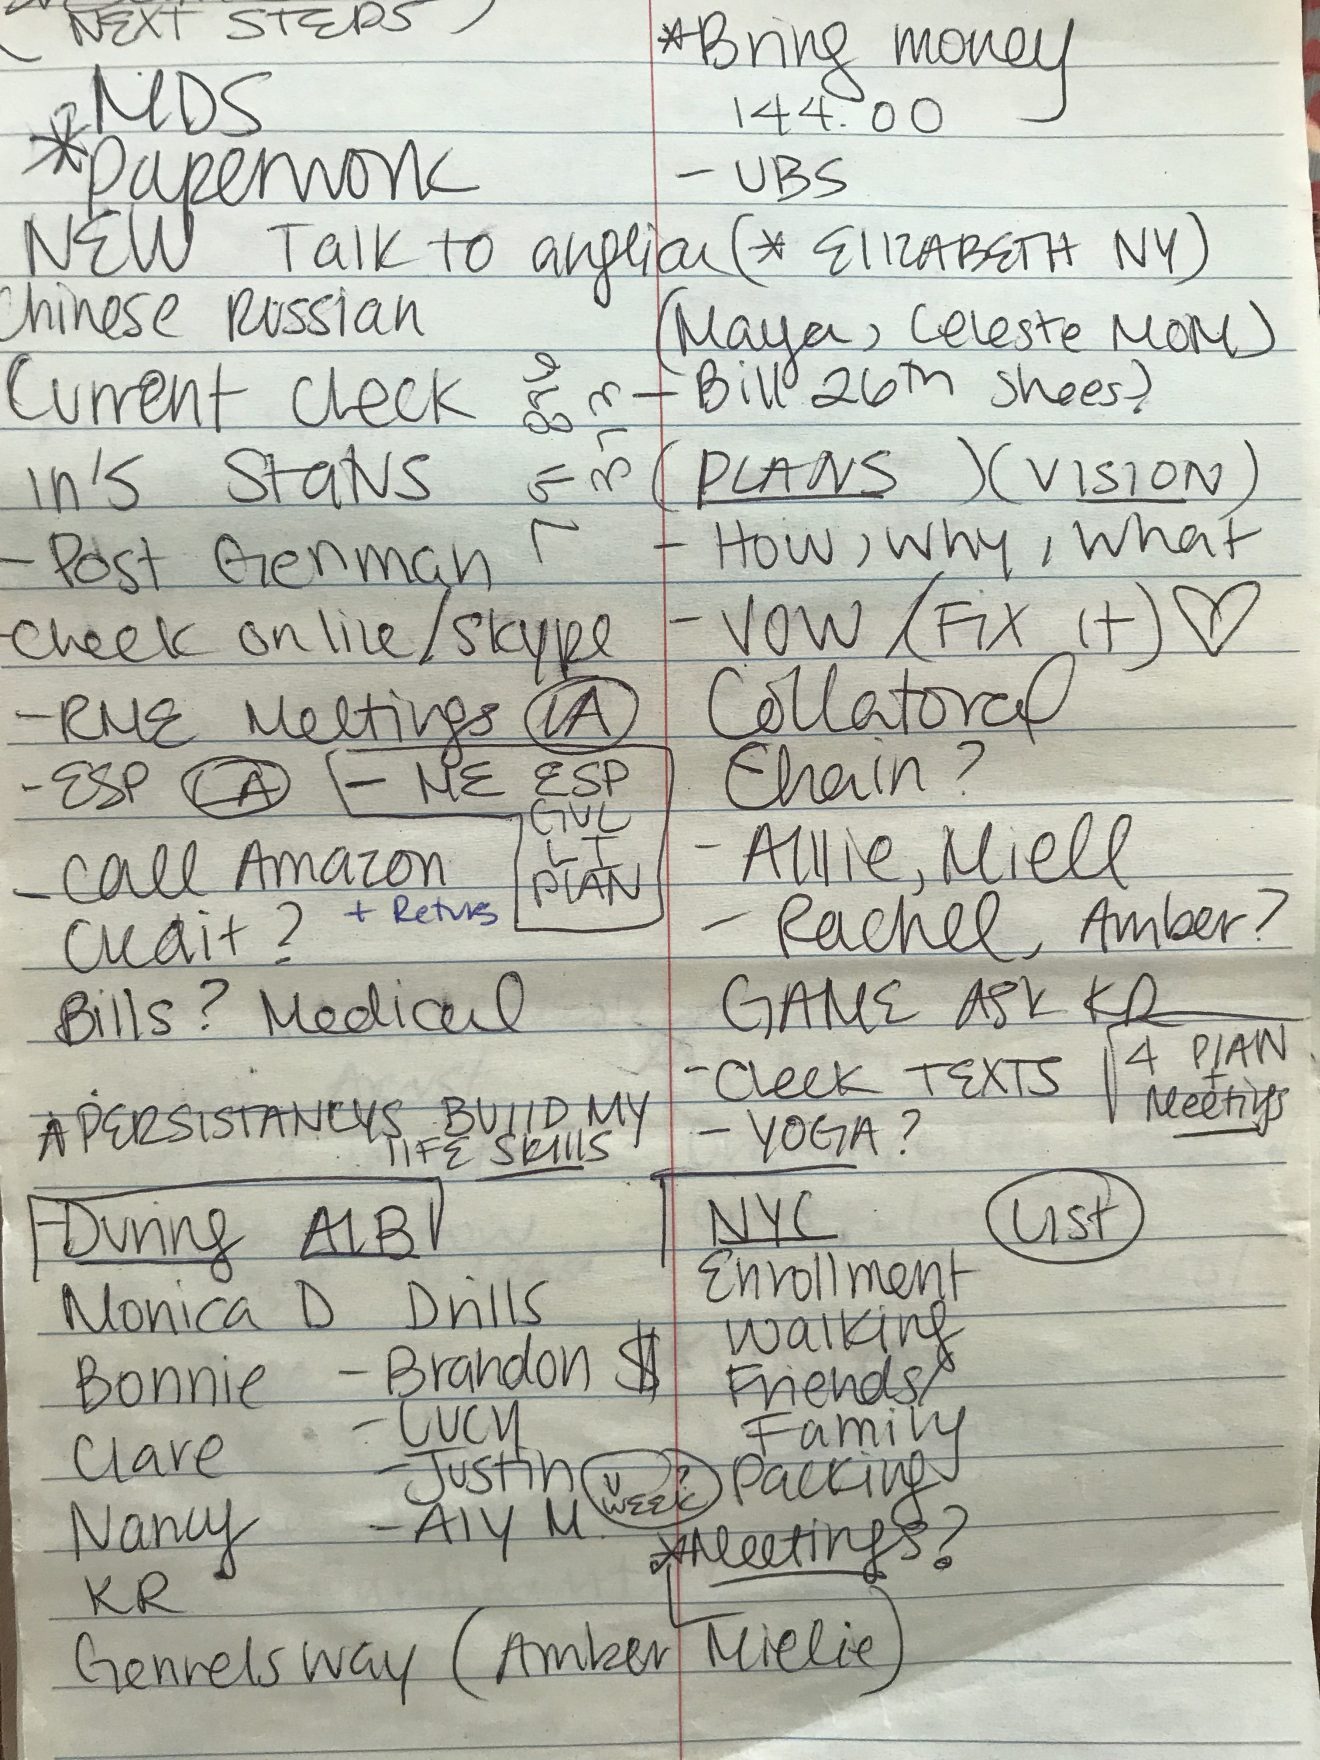 handwriting - Give Next Steps Rmds Bring mon money 144 00 papermonk Ubs New Talk to angliai Giizapath Ny Chinese Russian Maya, Celeste mom Current cleck Bill 26th Shoes? in's Stans in Plans Vision Post German How why, what Check on line skype Vow Fix it R